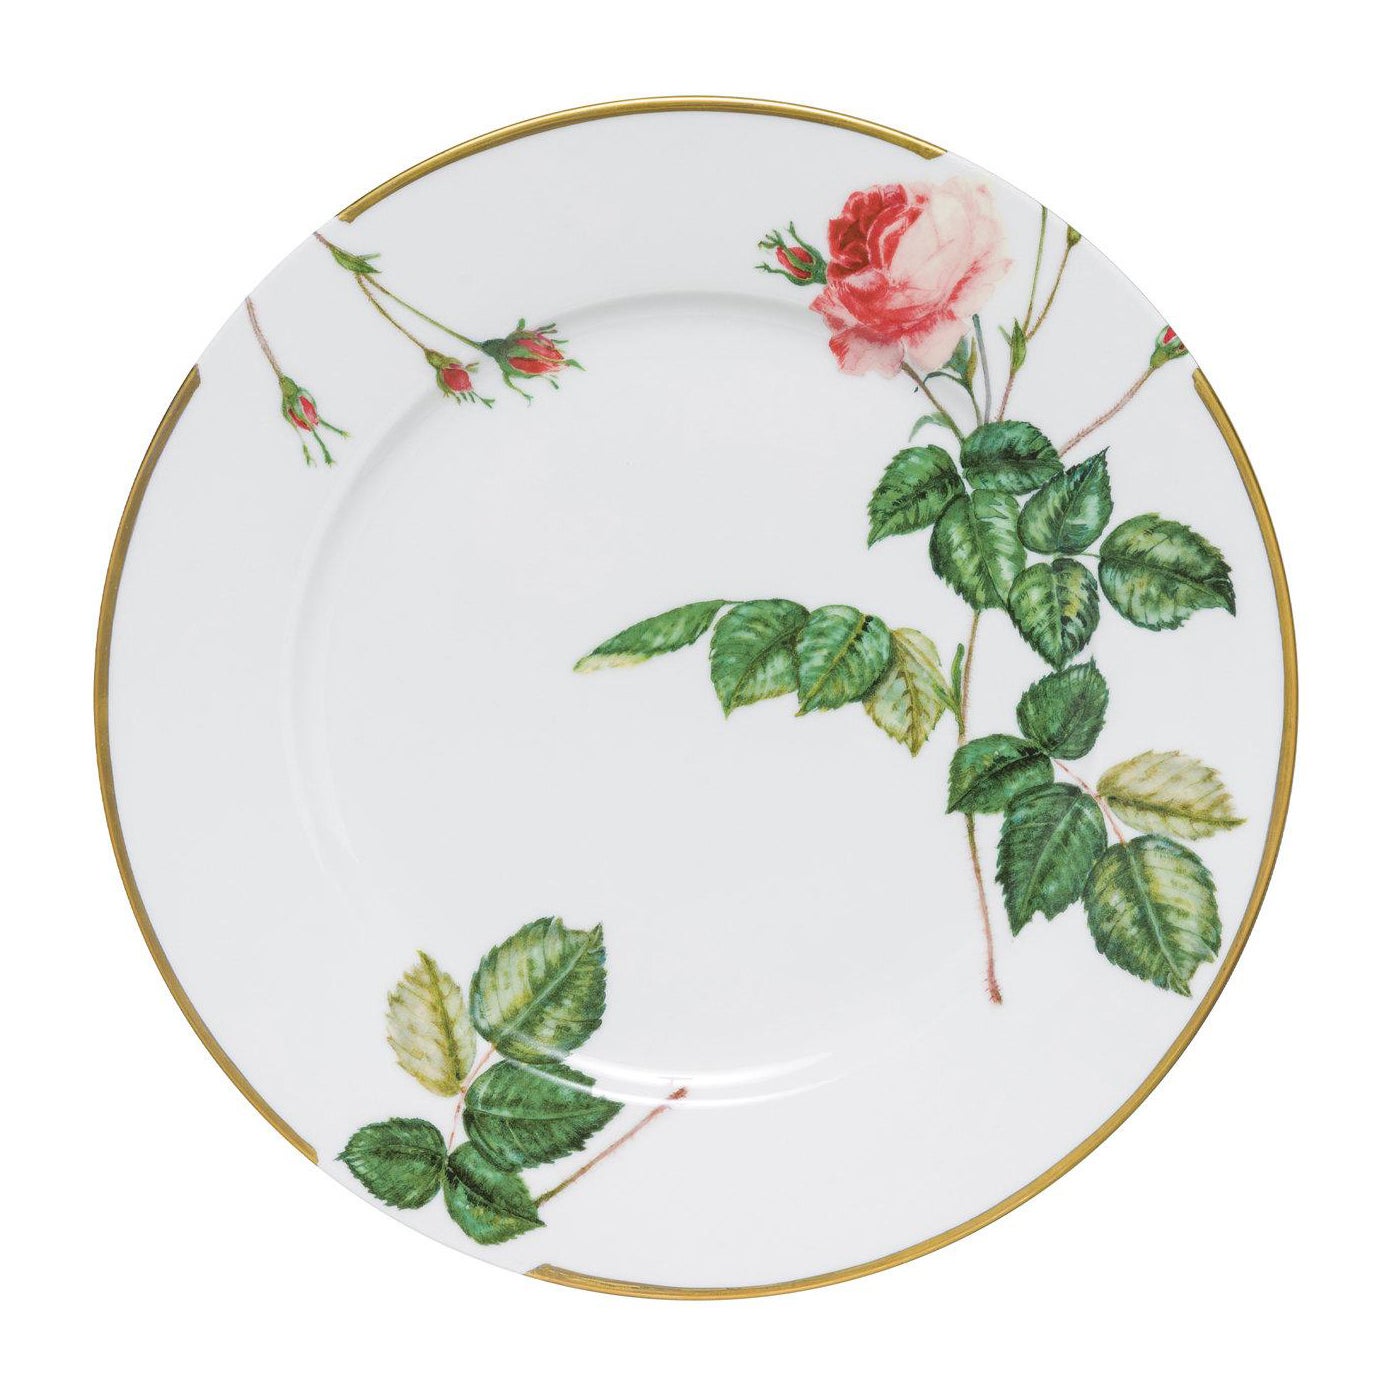 Rosa Rossa Collection Service Plate